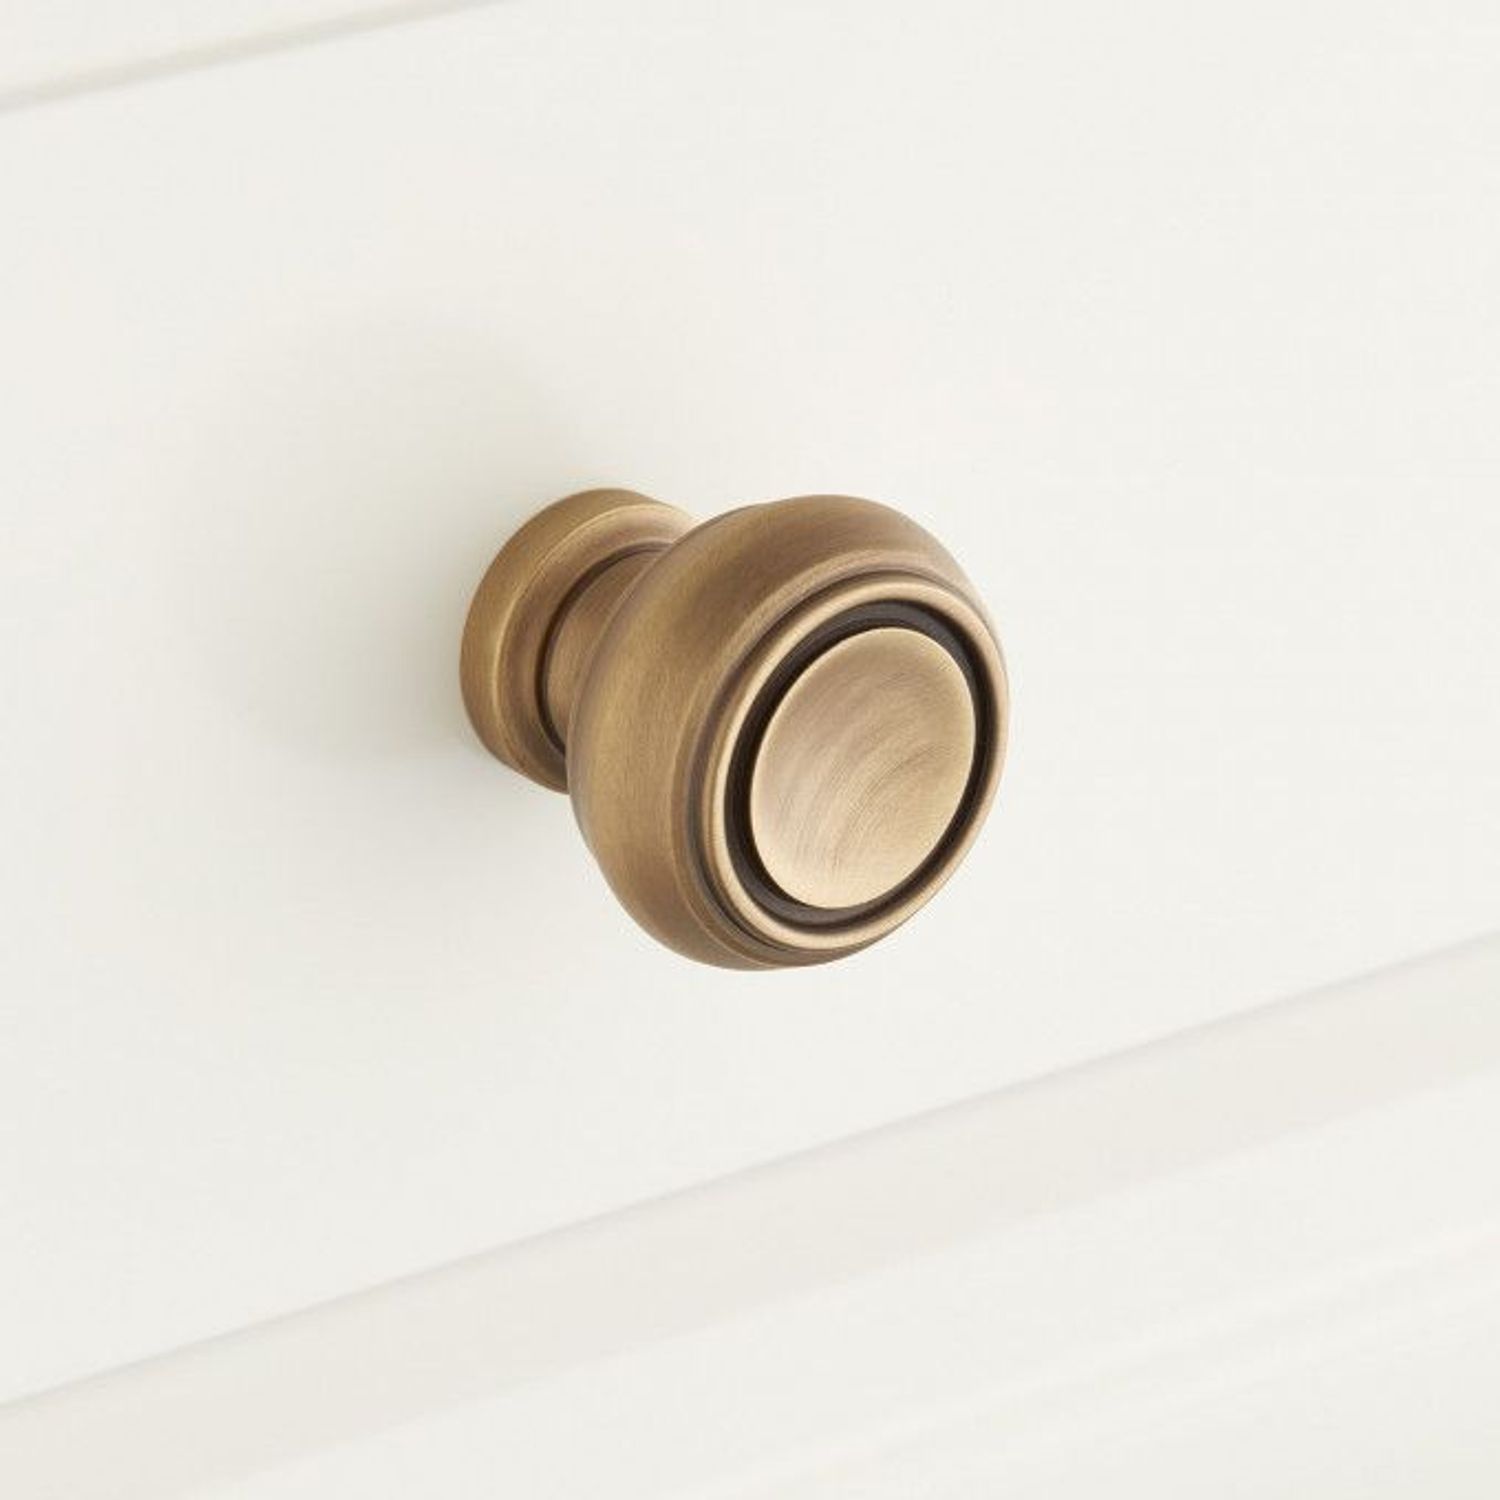 Shop Cipullo Solid Brass Round Cabinet Knob from Signature Hardware on Openhaus